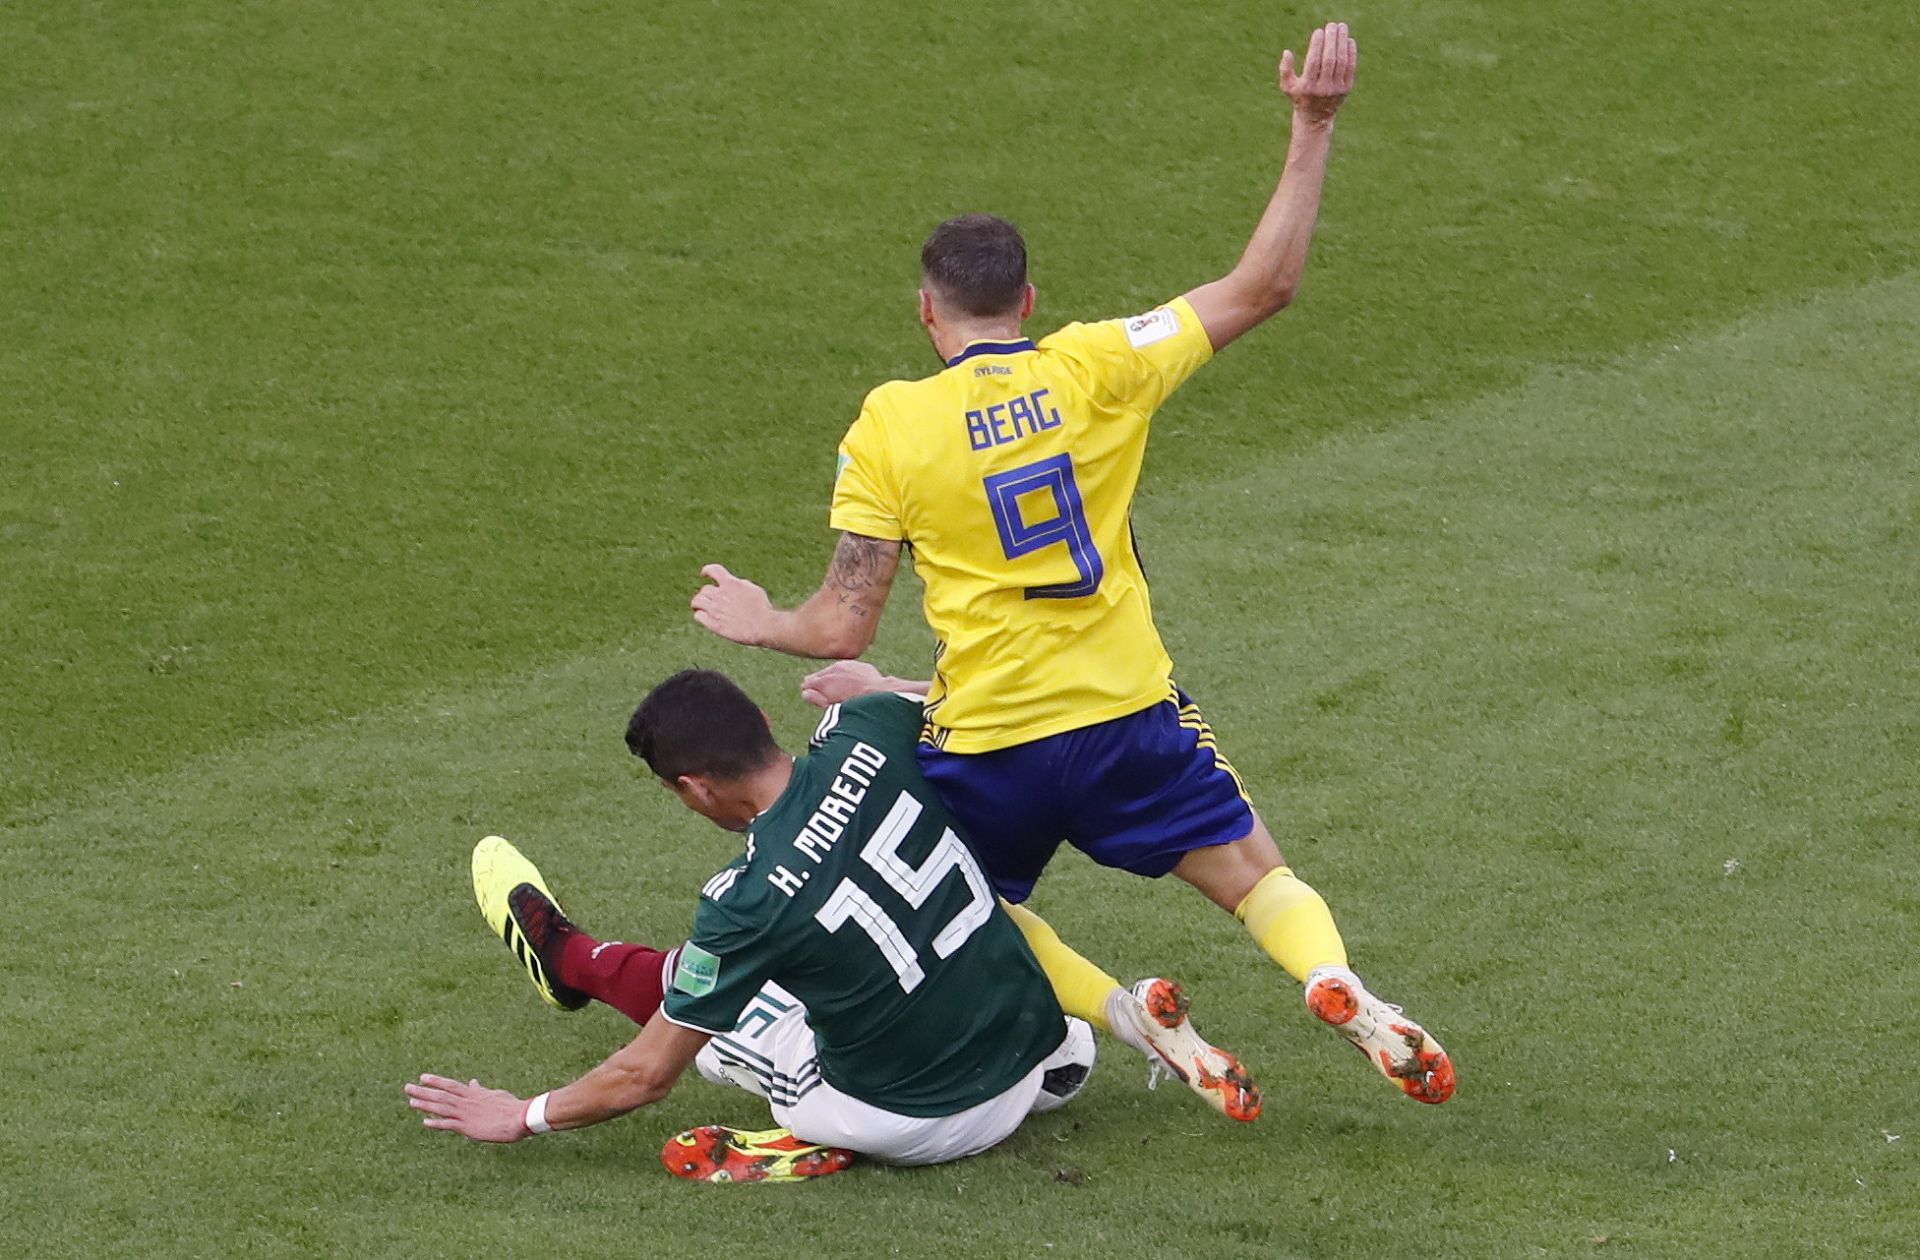 Hector Moreno (L) of Mexico fouls Marcus Berg of Sweden during the FIFA World Cup 2018 group F preliminary round soccer match between Mexico and Sweden in Ekaterinburg, Russia, 27 June 2018.